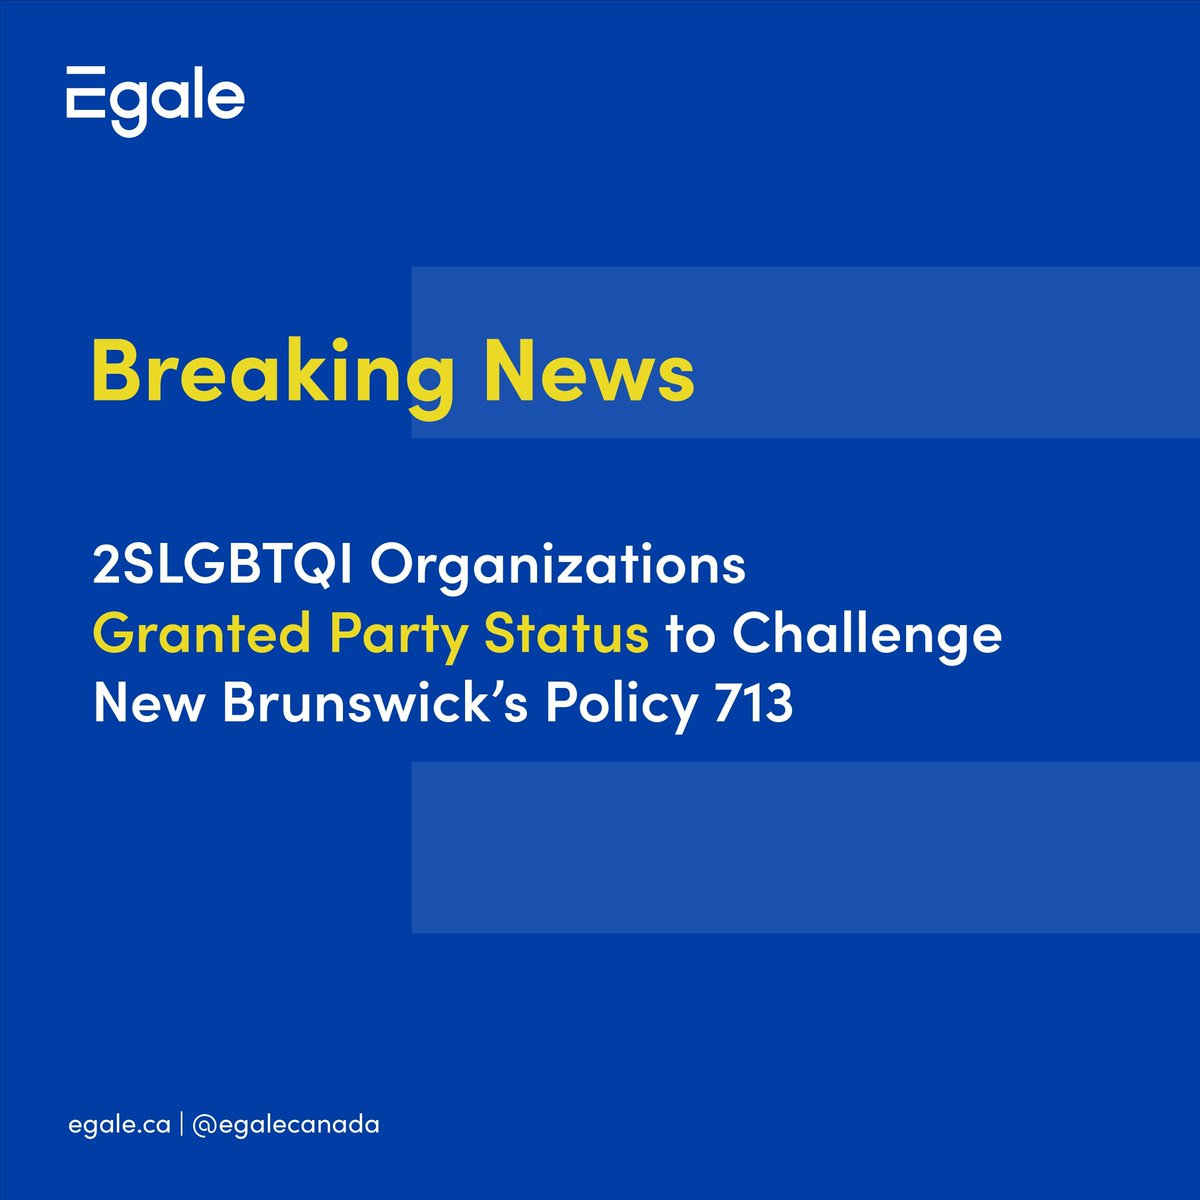 Breaking News: Egale Canada, along with New Brunswick-based 2SLGBTQI organizations @AlterAcadieNB, Chroma NB, and Imprint Youth, have been granted leave to intervene as added parties in litigation challenging changes to #Policy713. Learn more: egale.ca/nb-intervene-m…